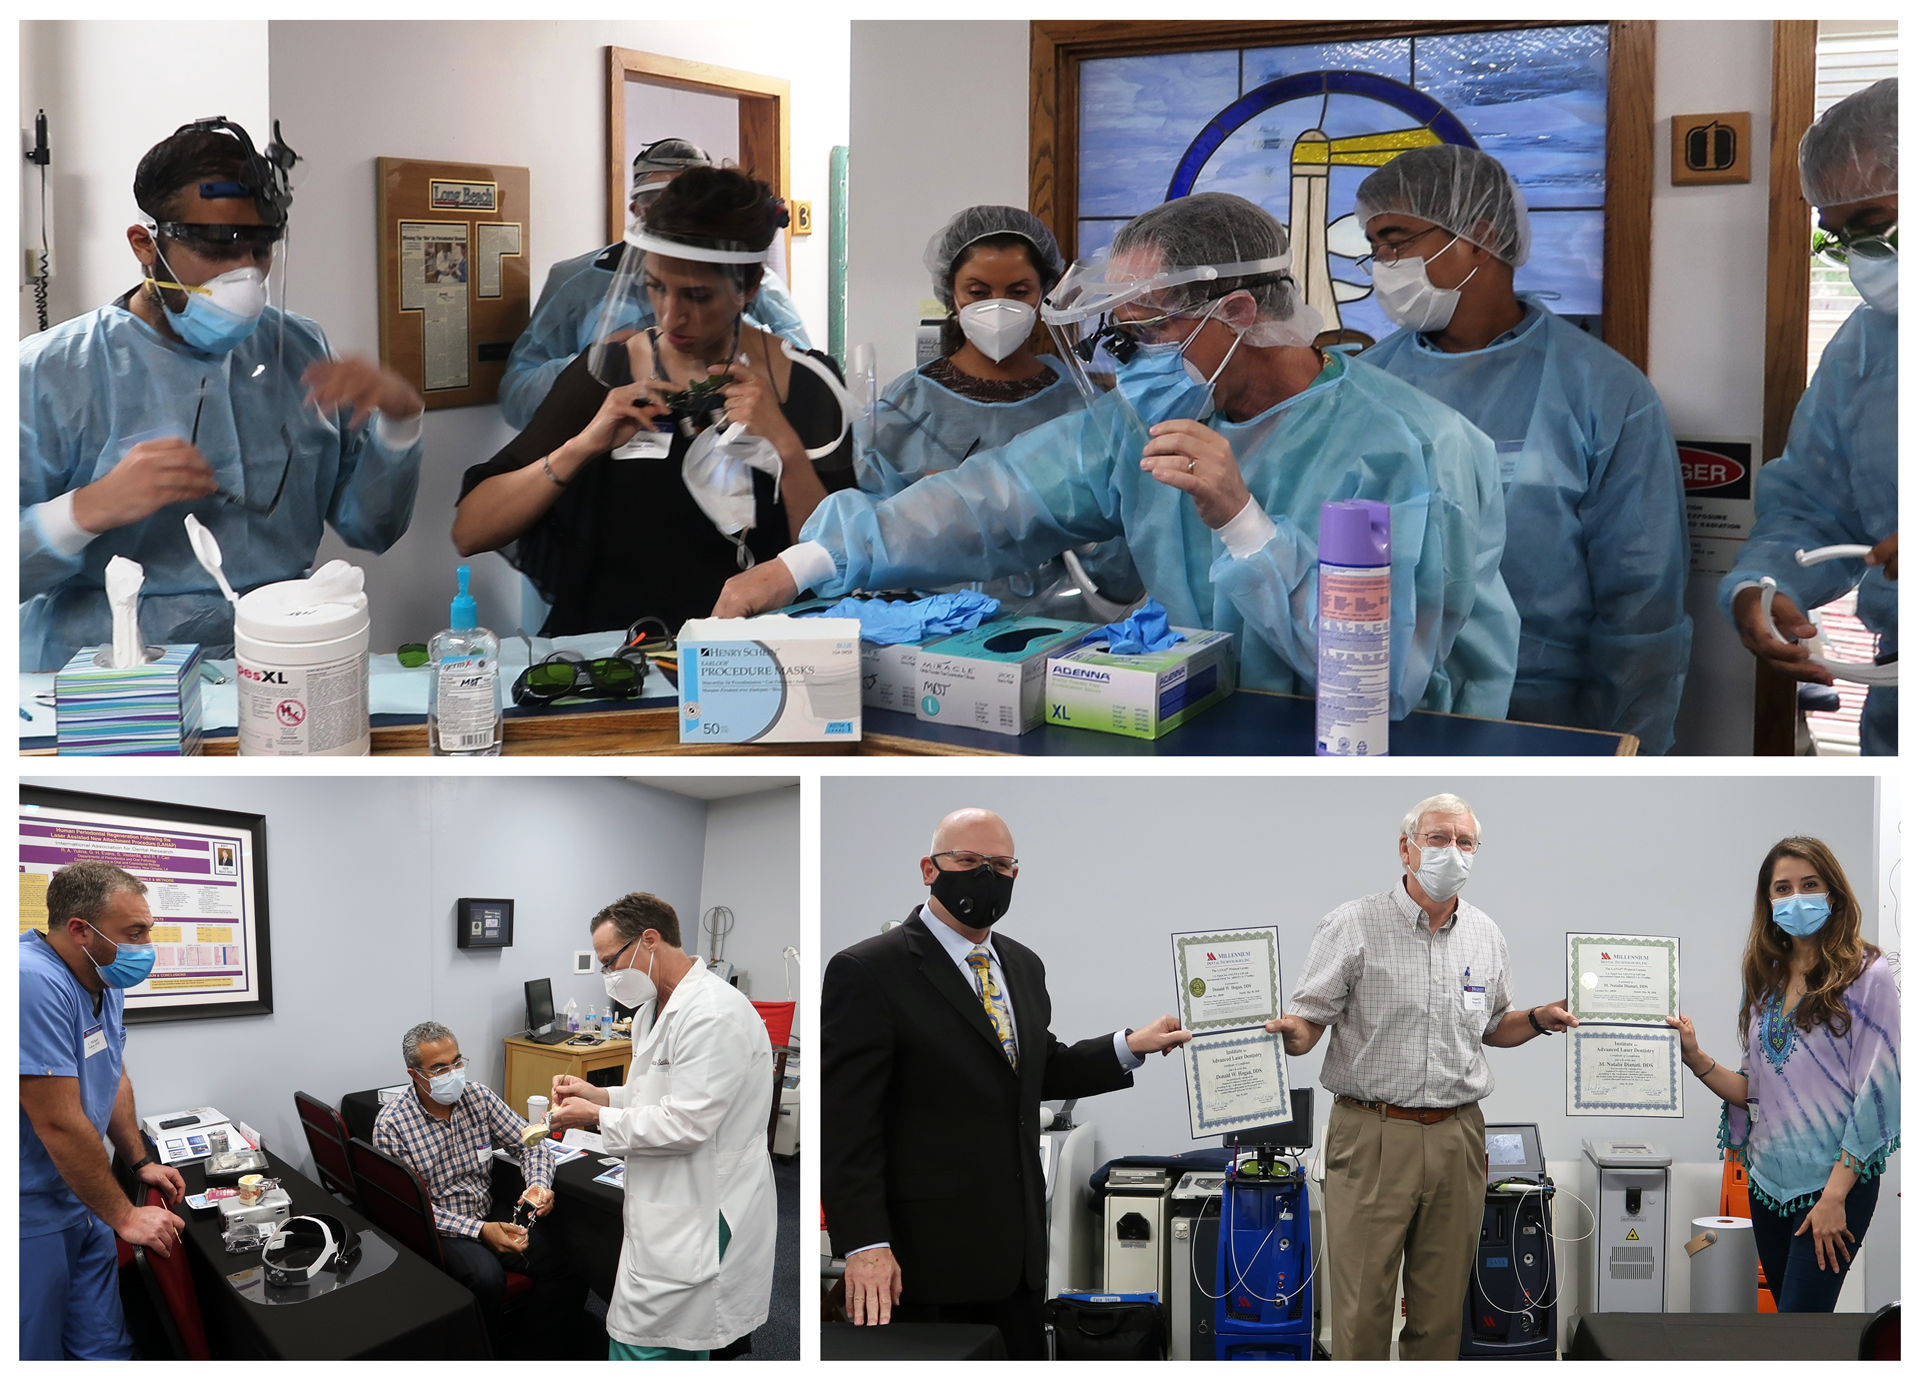 Institute for Advanced Laser Dentistry Announces First Live Patient Clinical Training Post COVID-19